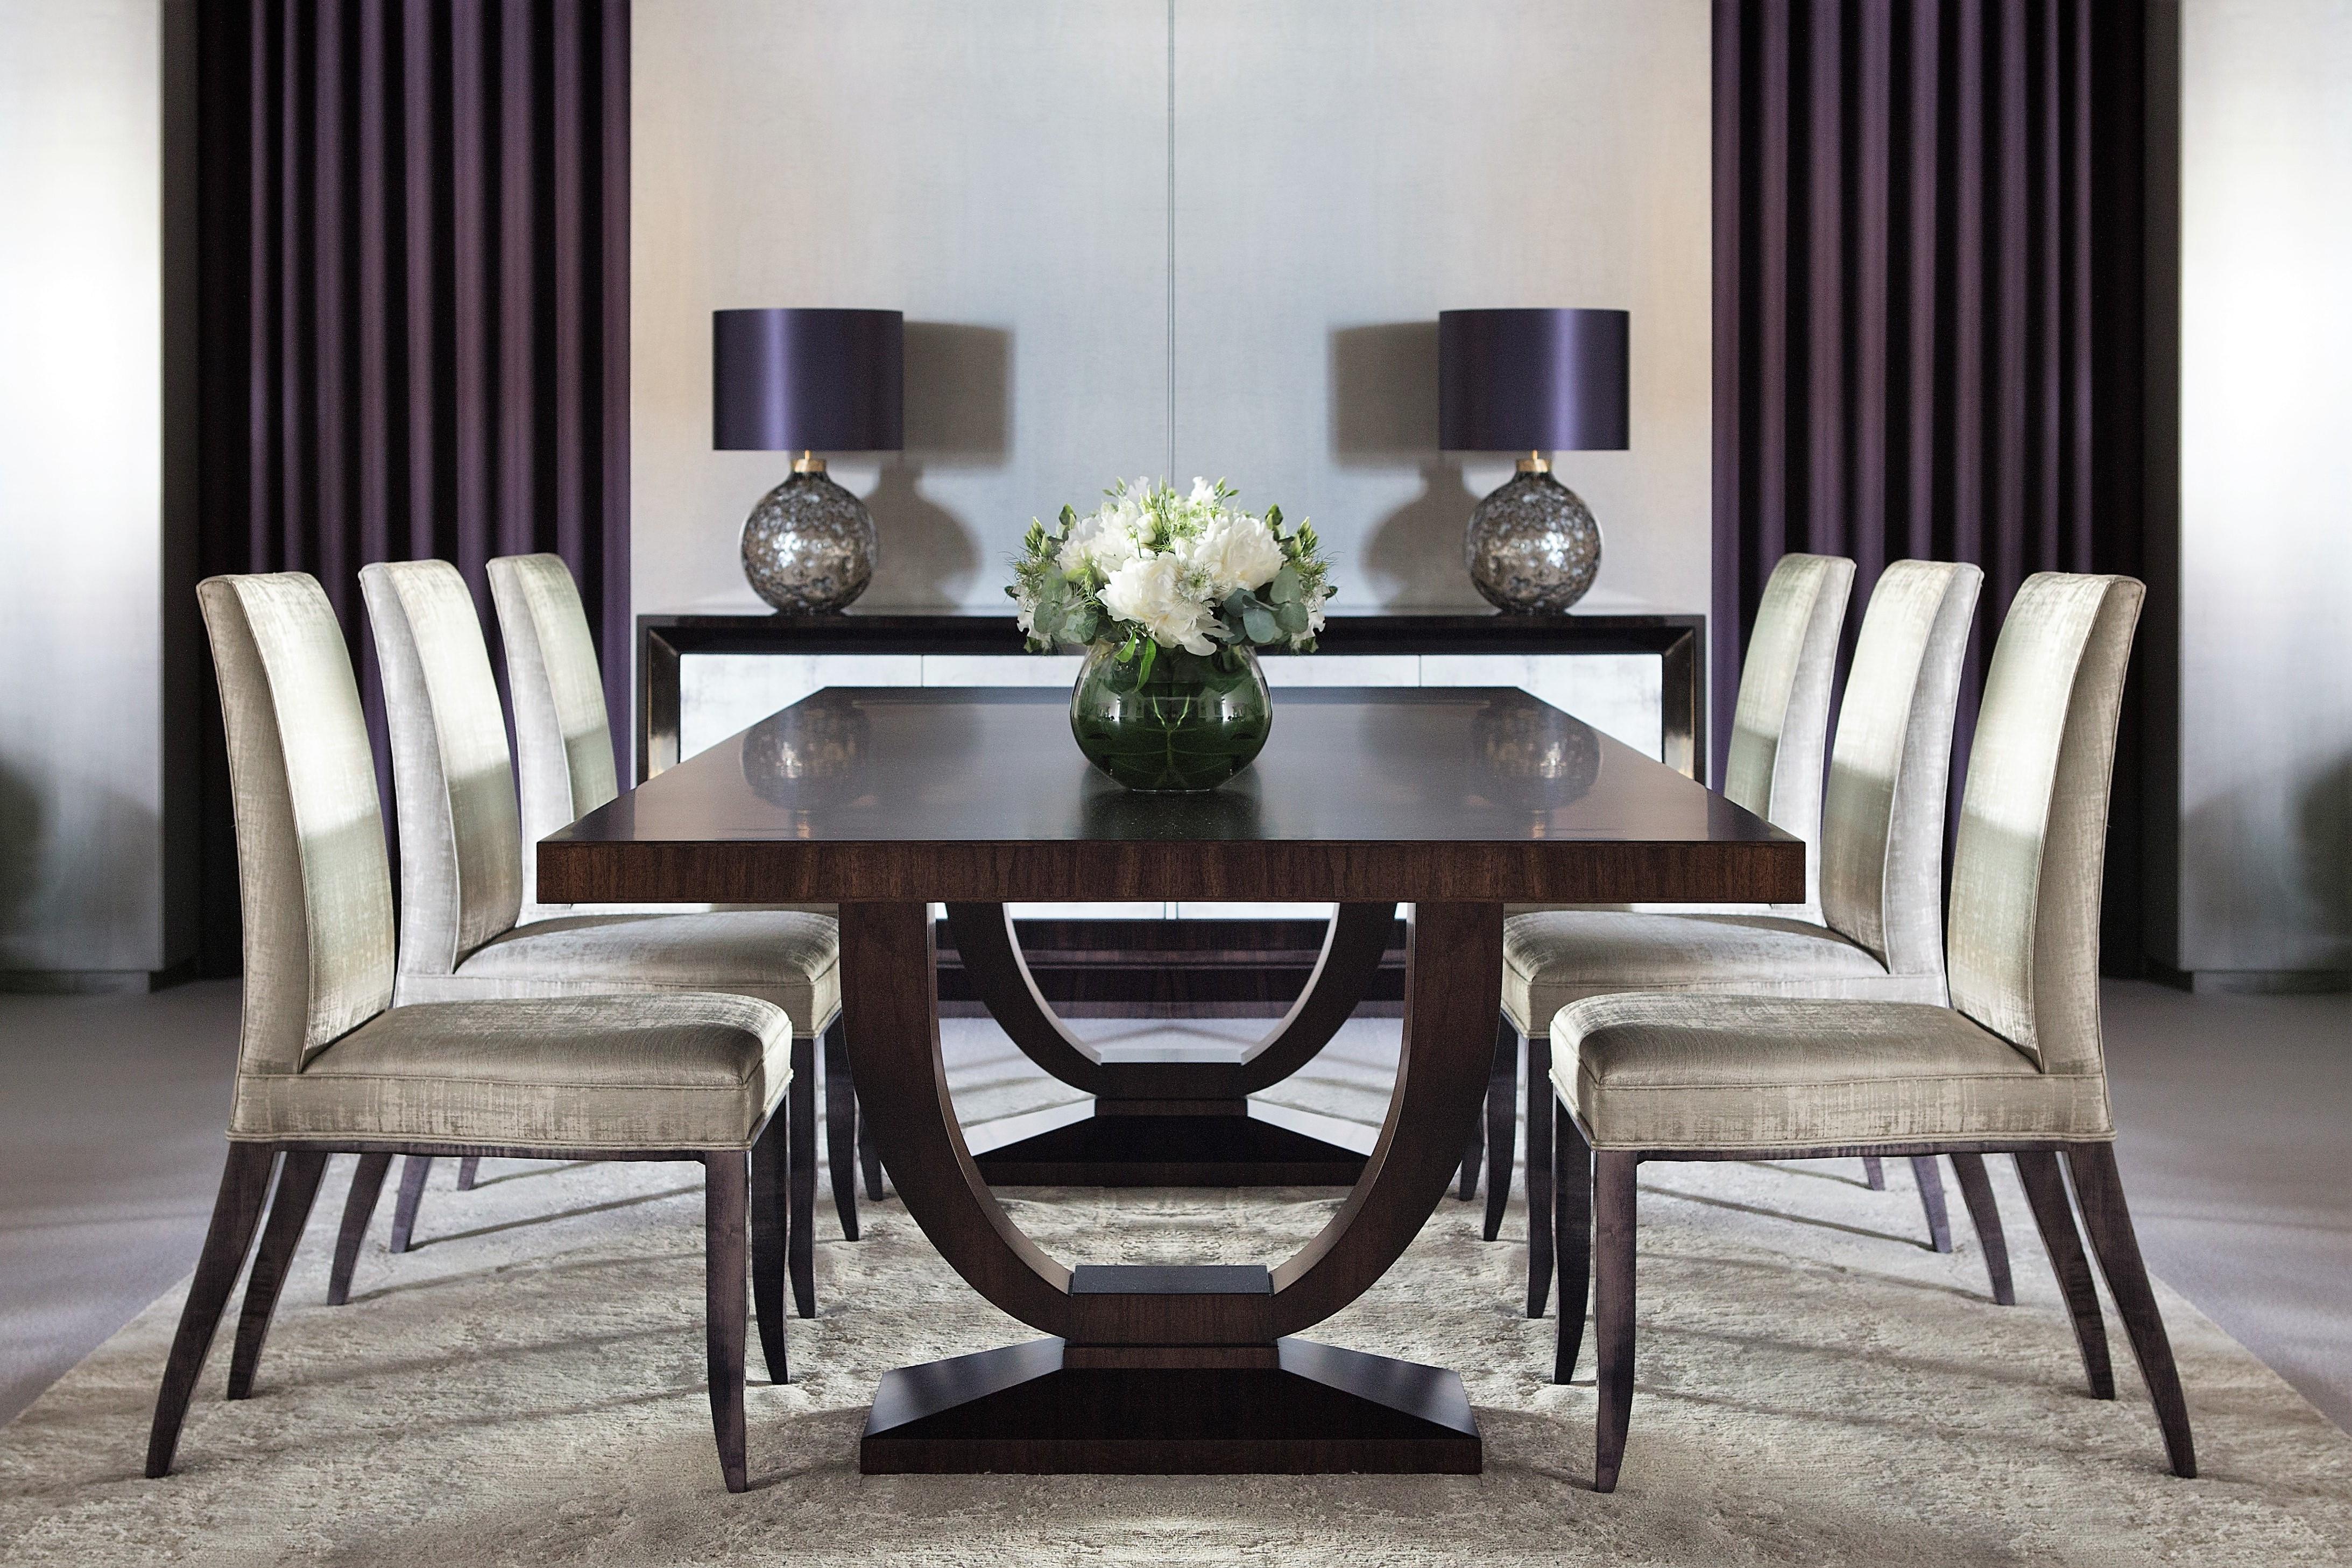 The ultimate Davidson dining table finished in Macassar ebony with ebonized detailing.

With its Classic yet timeless appeal, this table is an investment to last a lifetime, exuding sophisticated Art Deco style and elegance.